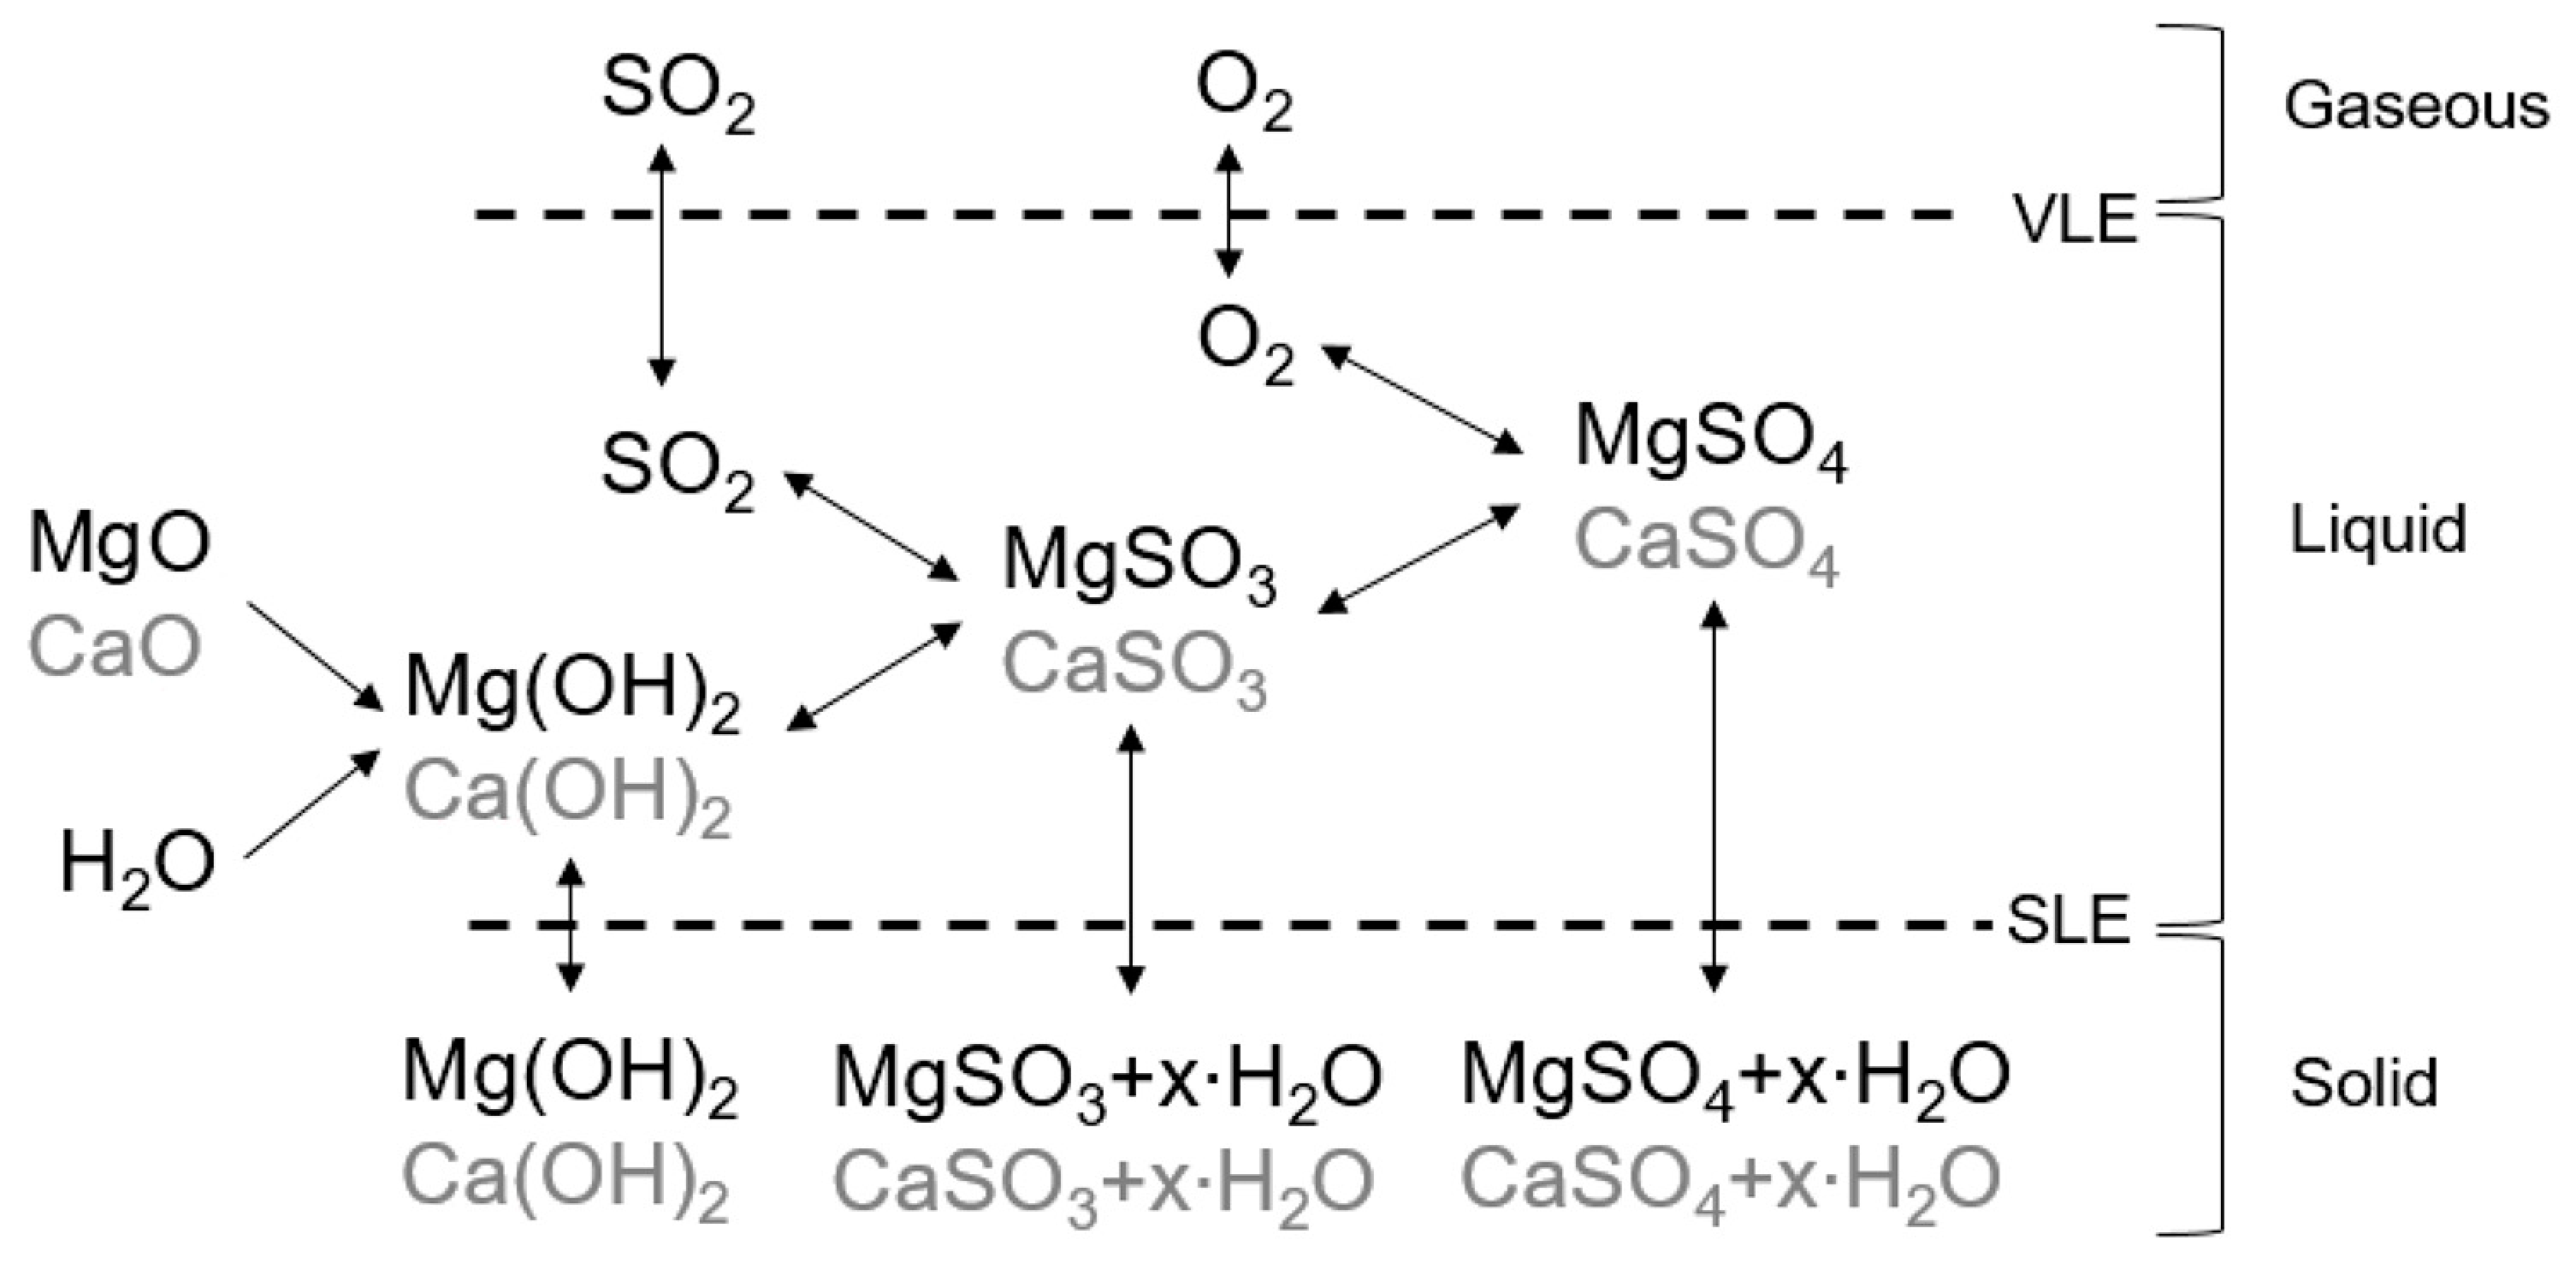 Processes | Free Full-Text | Solubility Data of Potential Salts in the MgO-CaO-SO2-H2O-O2  System for Process Modeling